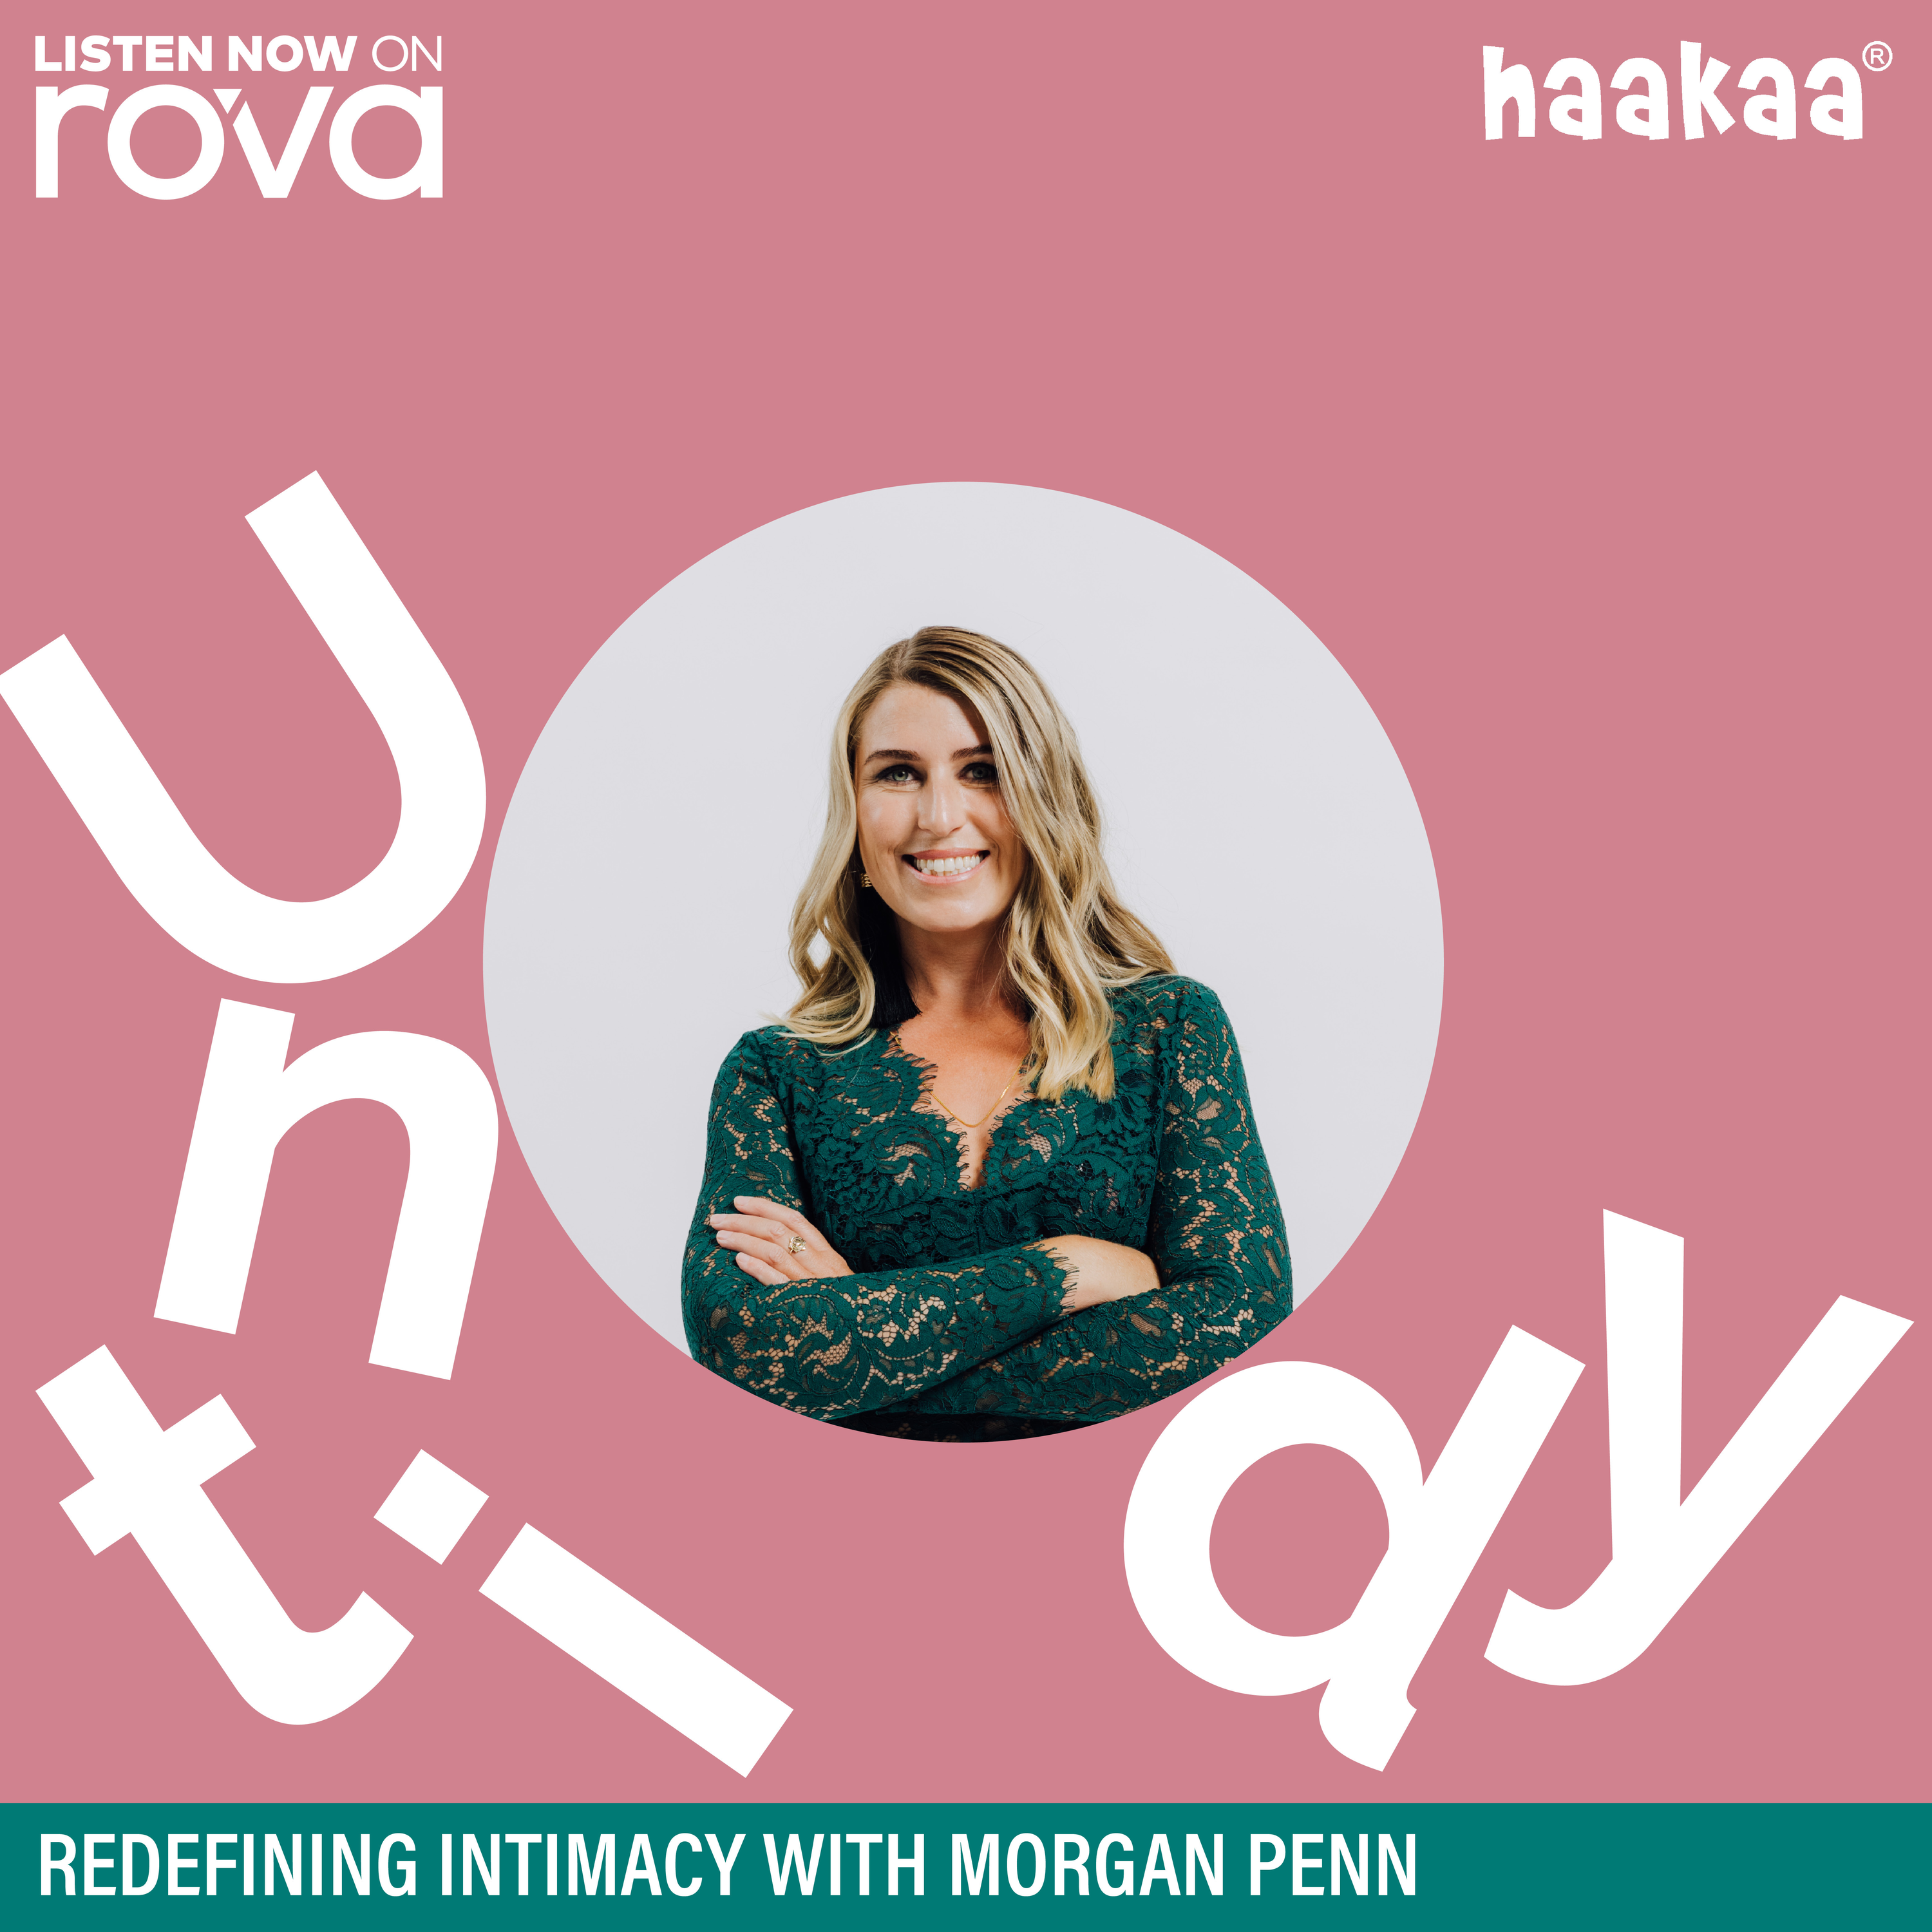 Redefining intimacy with Morgan Penn